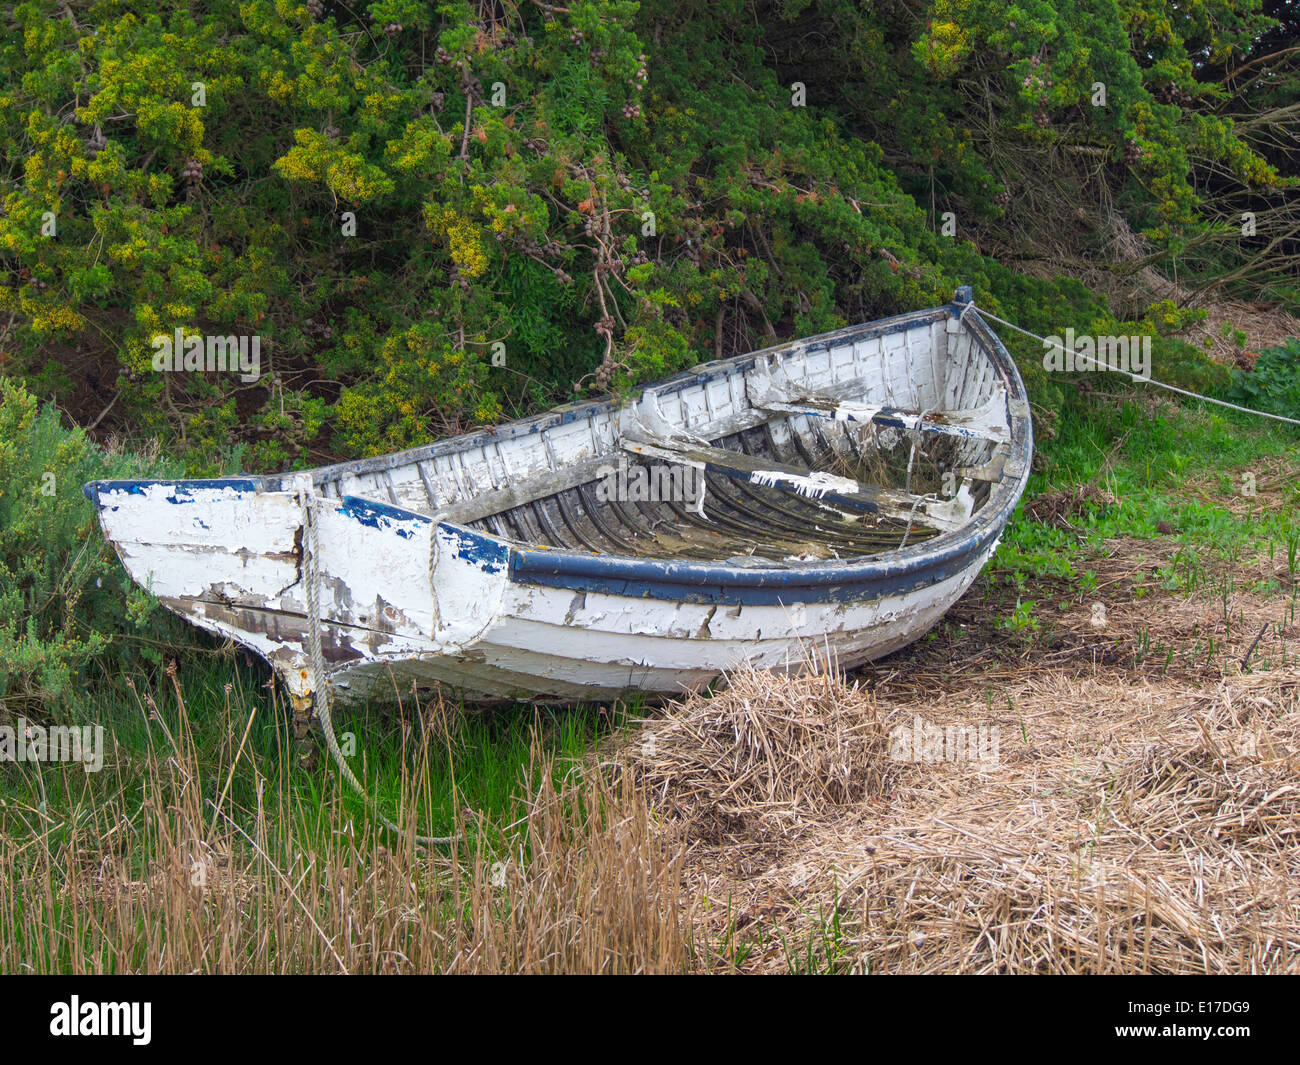 A derelict old wooden fishing boat lying on rough grass at Brancaster Norfolk UK Stock Photo